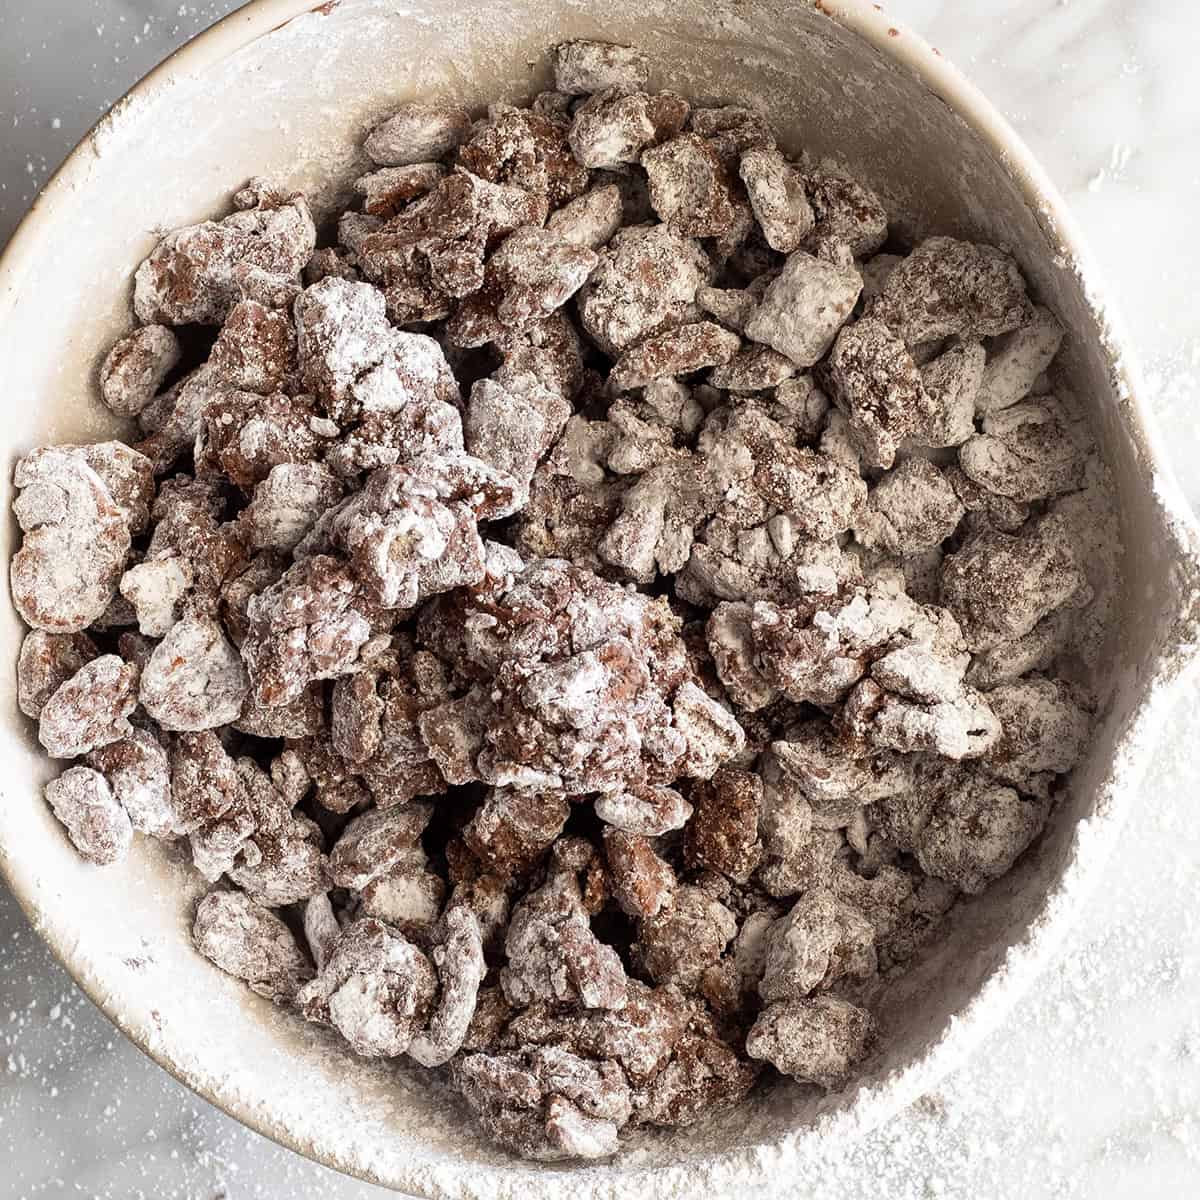 How to Make Puppy Chow - puppy chow after coating with powdered sugar